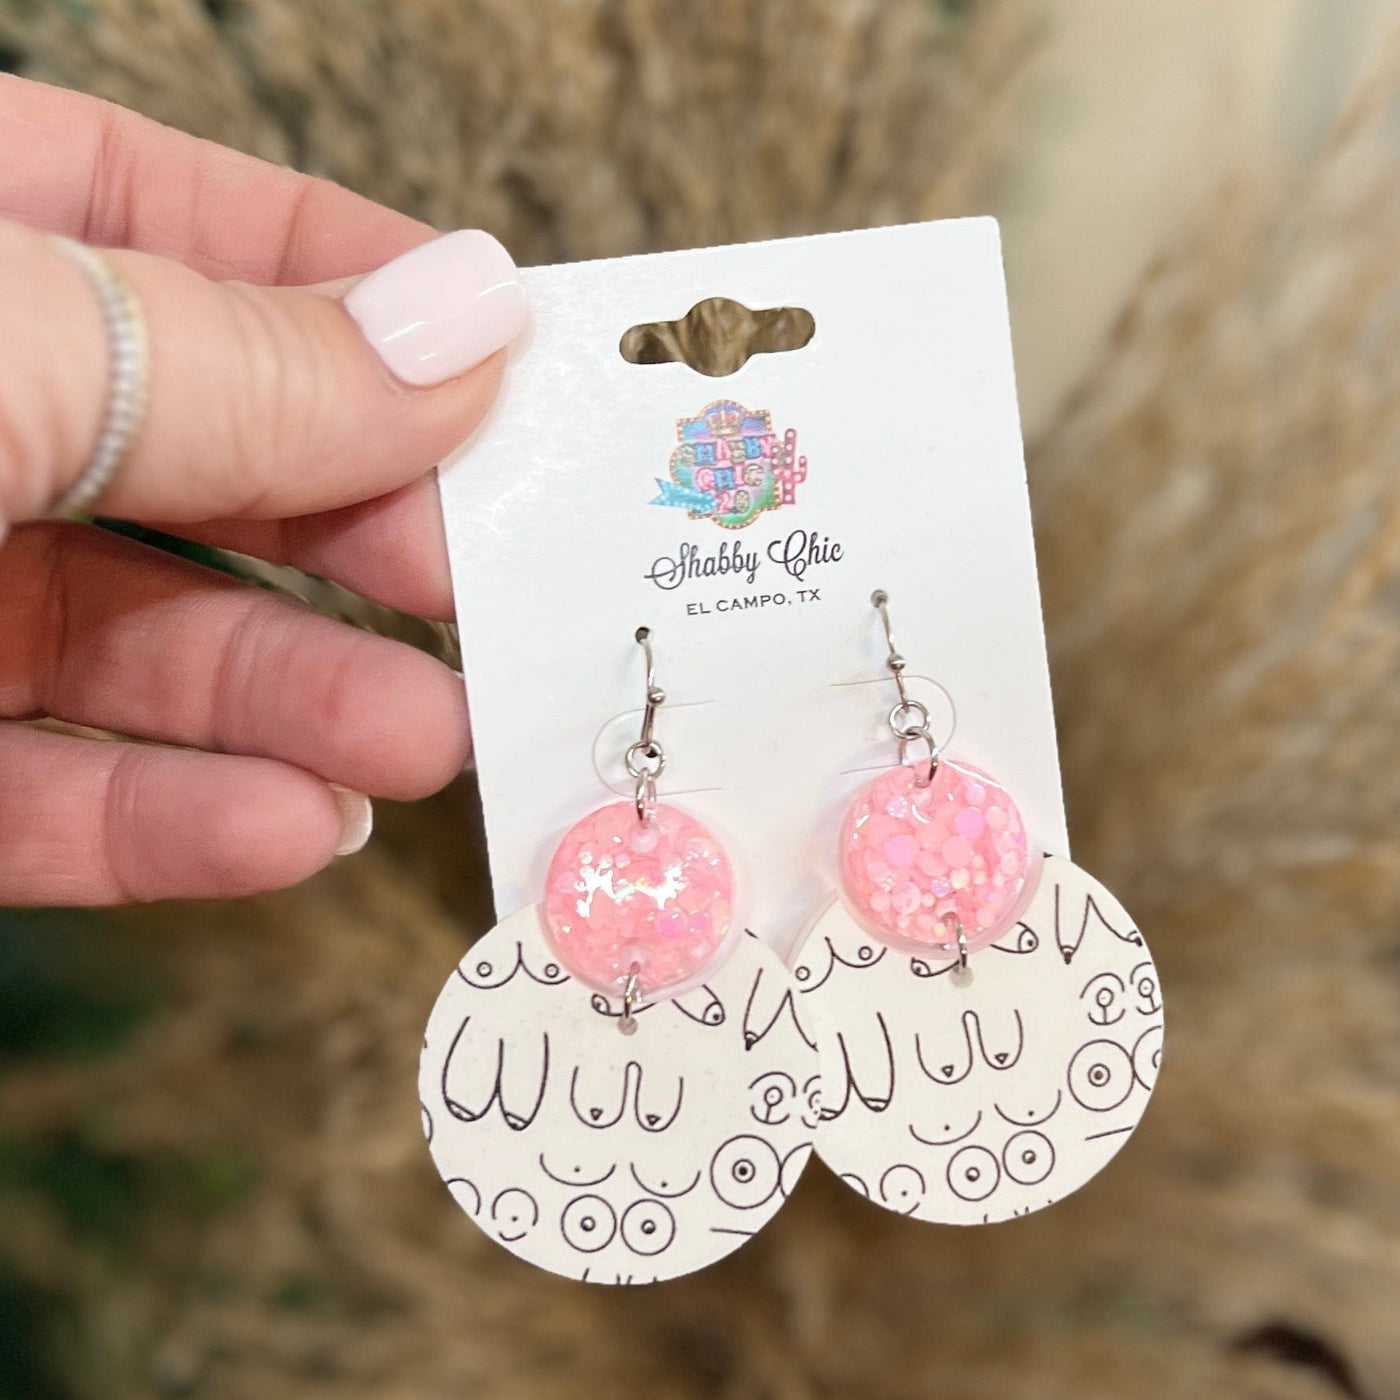 Breast Cancer Awareness Earrings Shabby Chic Boutique and Tanning Salon Tatas Earrings